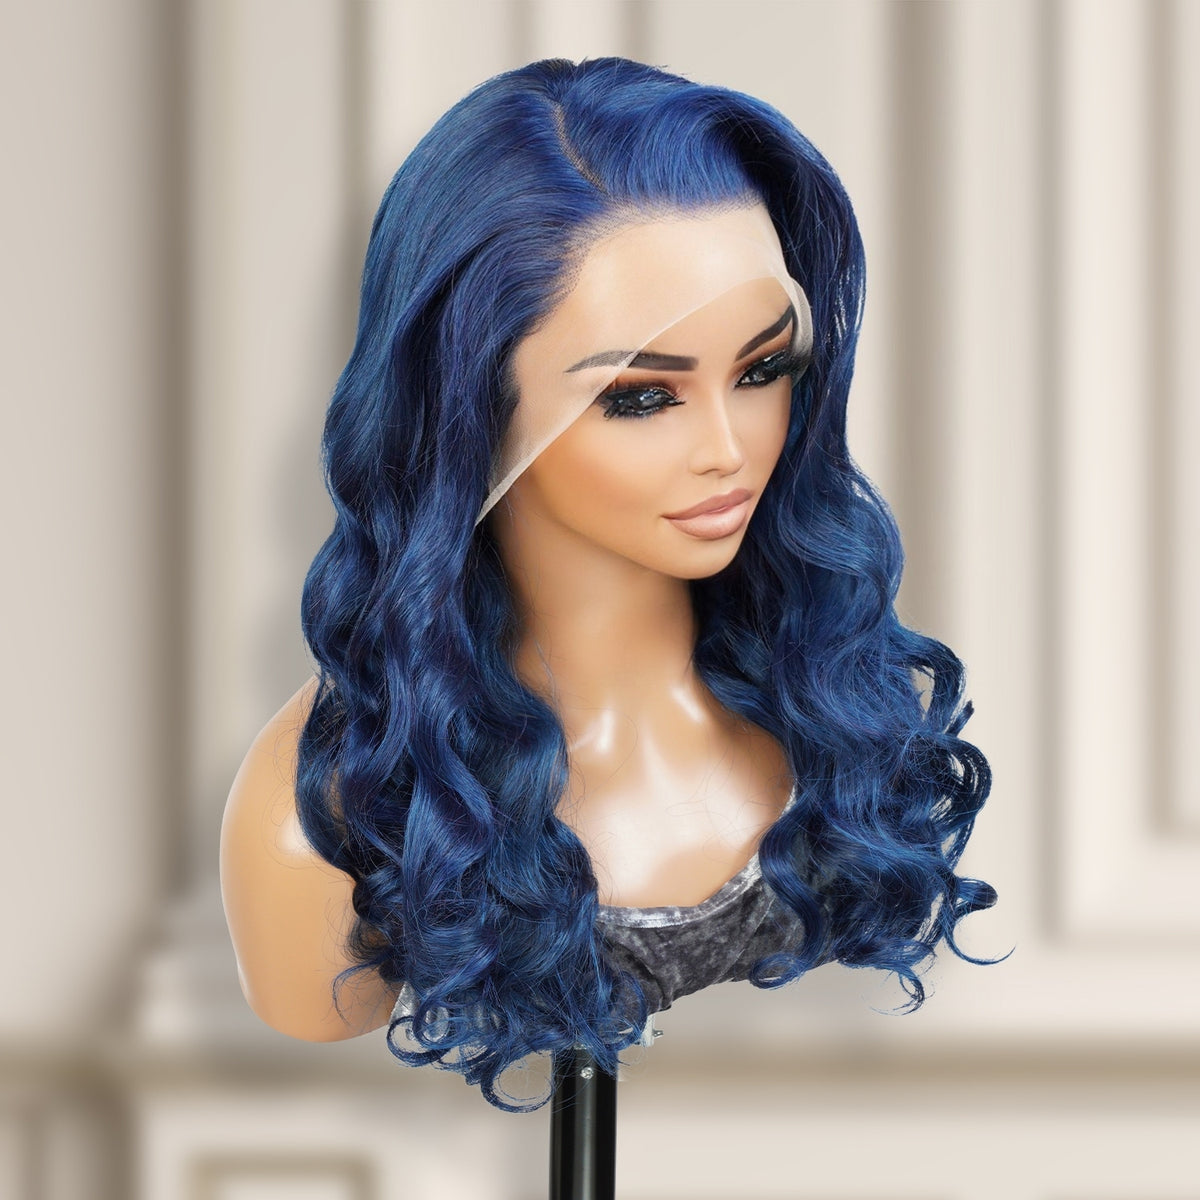 UpScale 100% Human Hair Glueless 13x4 Lace Frontal Wig Light Blue Body Wave 20"